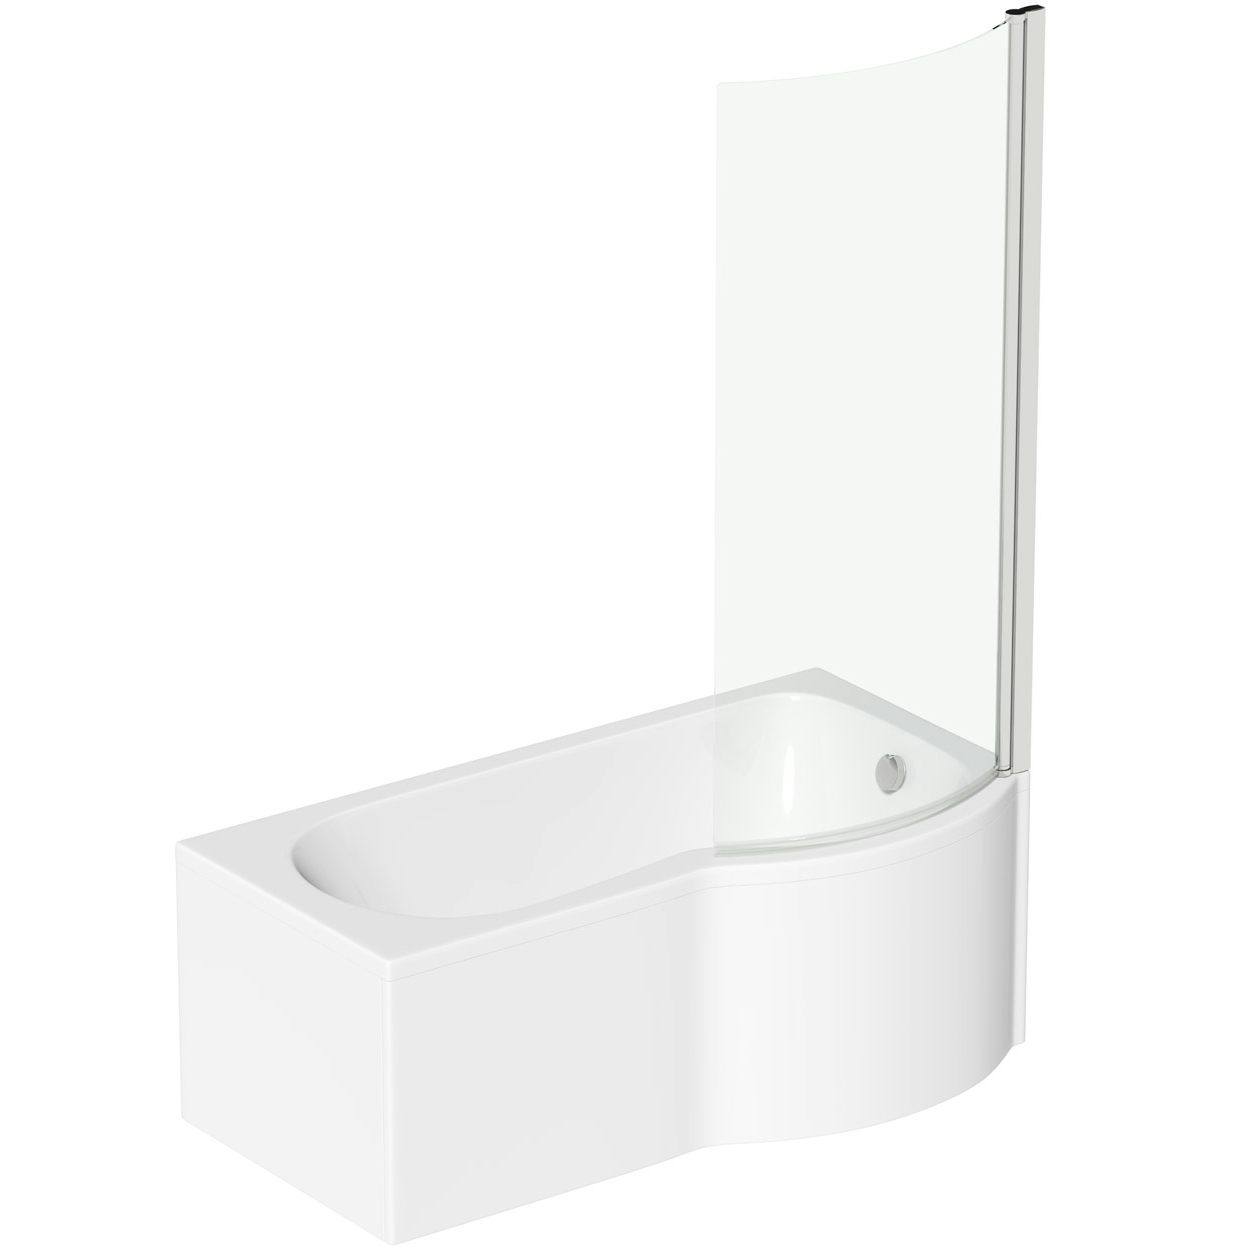 Orchard P shaped right handed shower bath 1500mm with 6mm shower screen